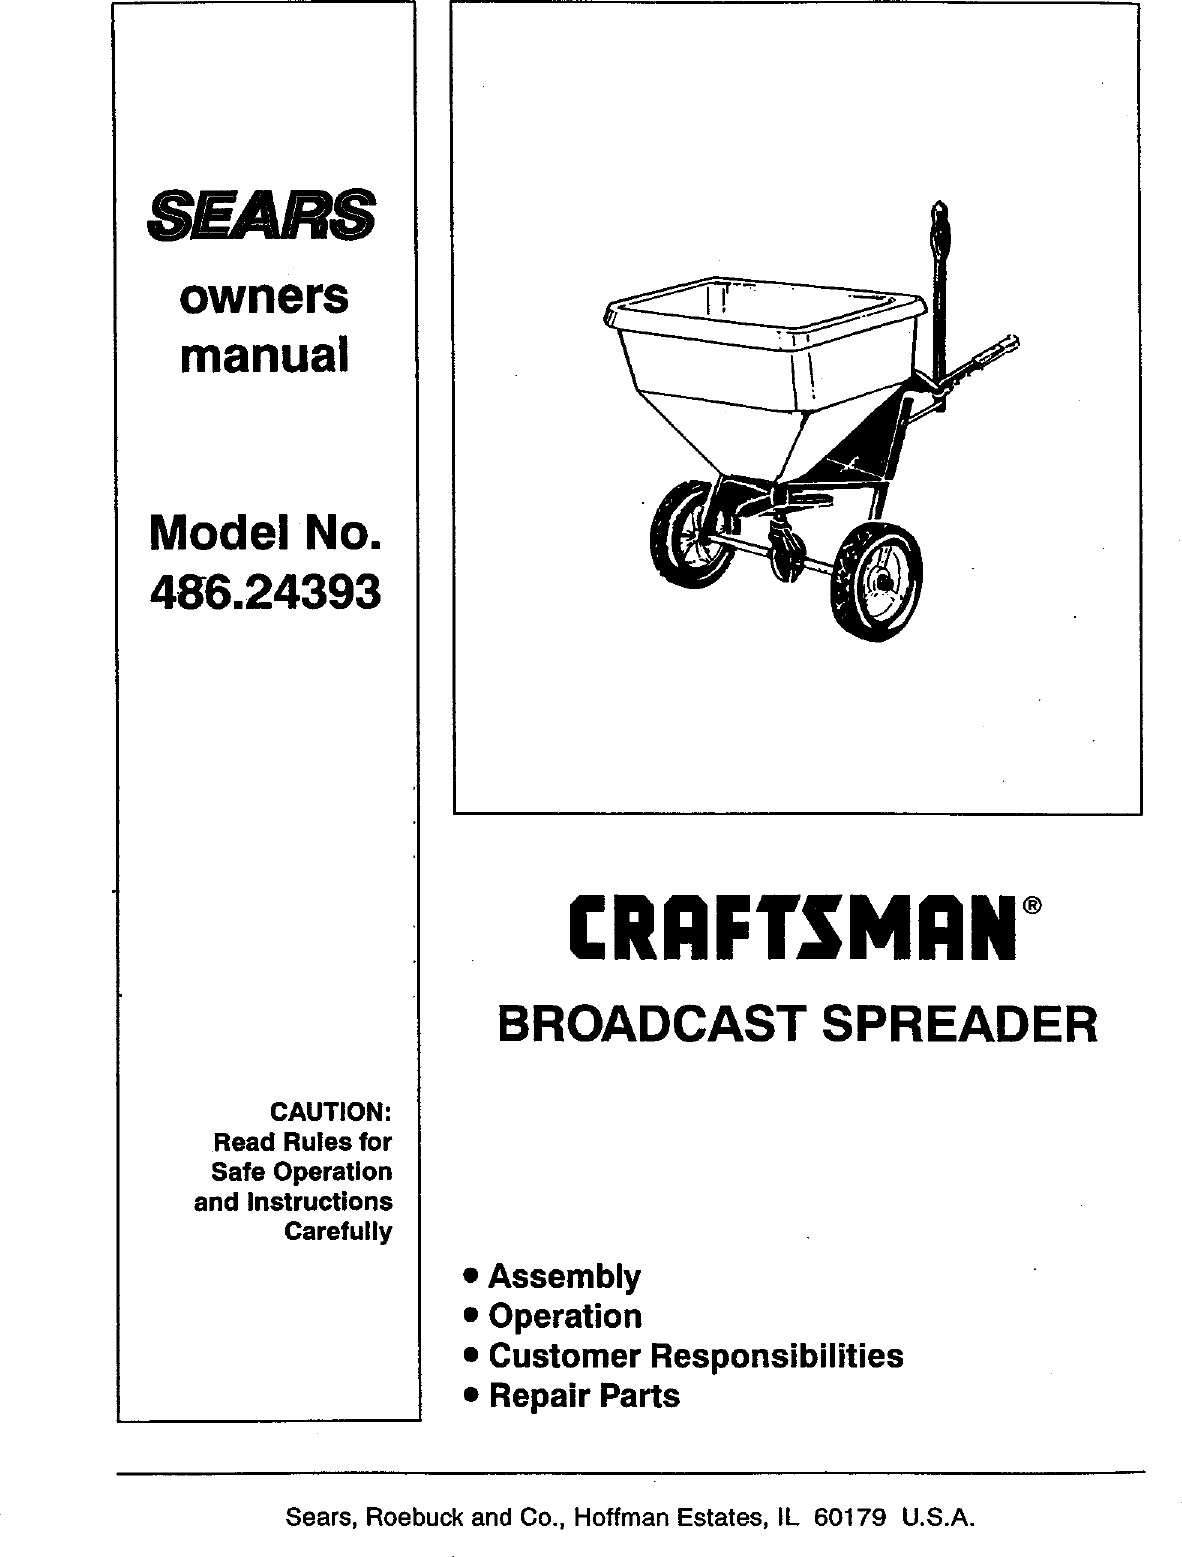 Page 1 of 6 - Craftsman 48624393 User Manual  BROADCAST SPREADER - Manuals And Guides 98110281